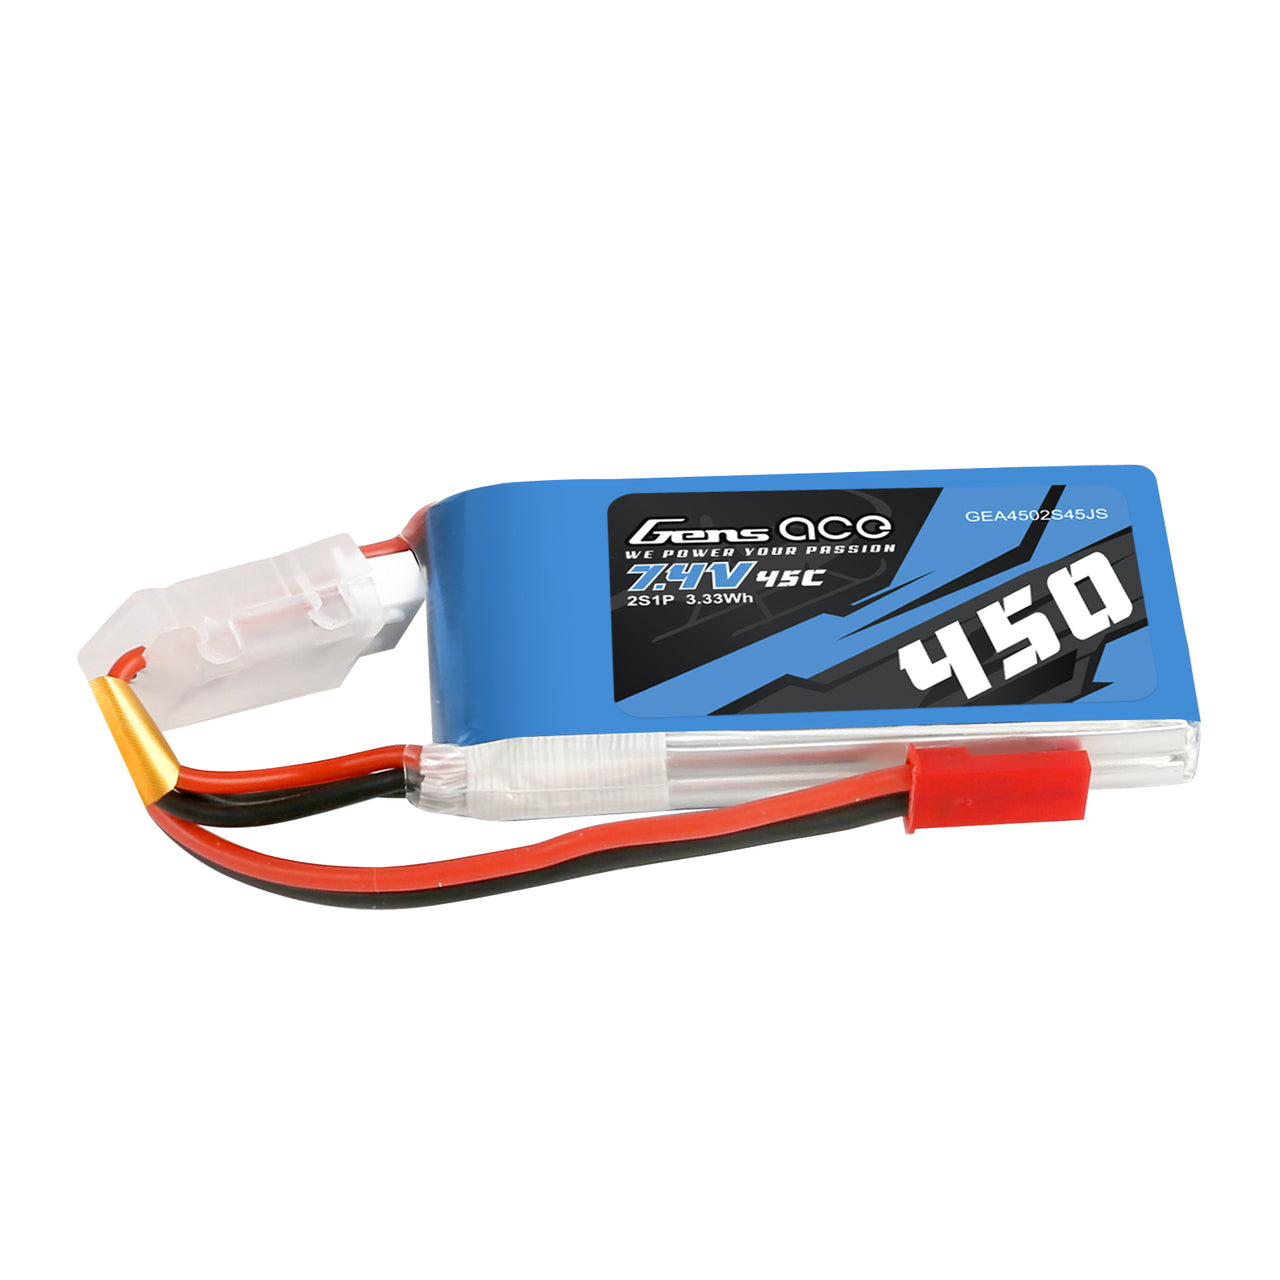 Gens Ace 400mah 35C 2S 7.4V LiPo RC Soft Pack Battery with JST